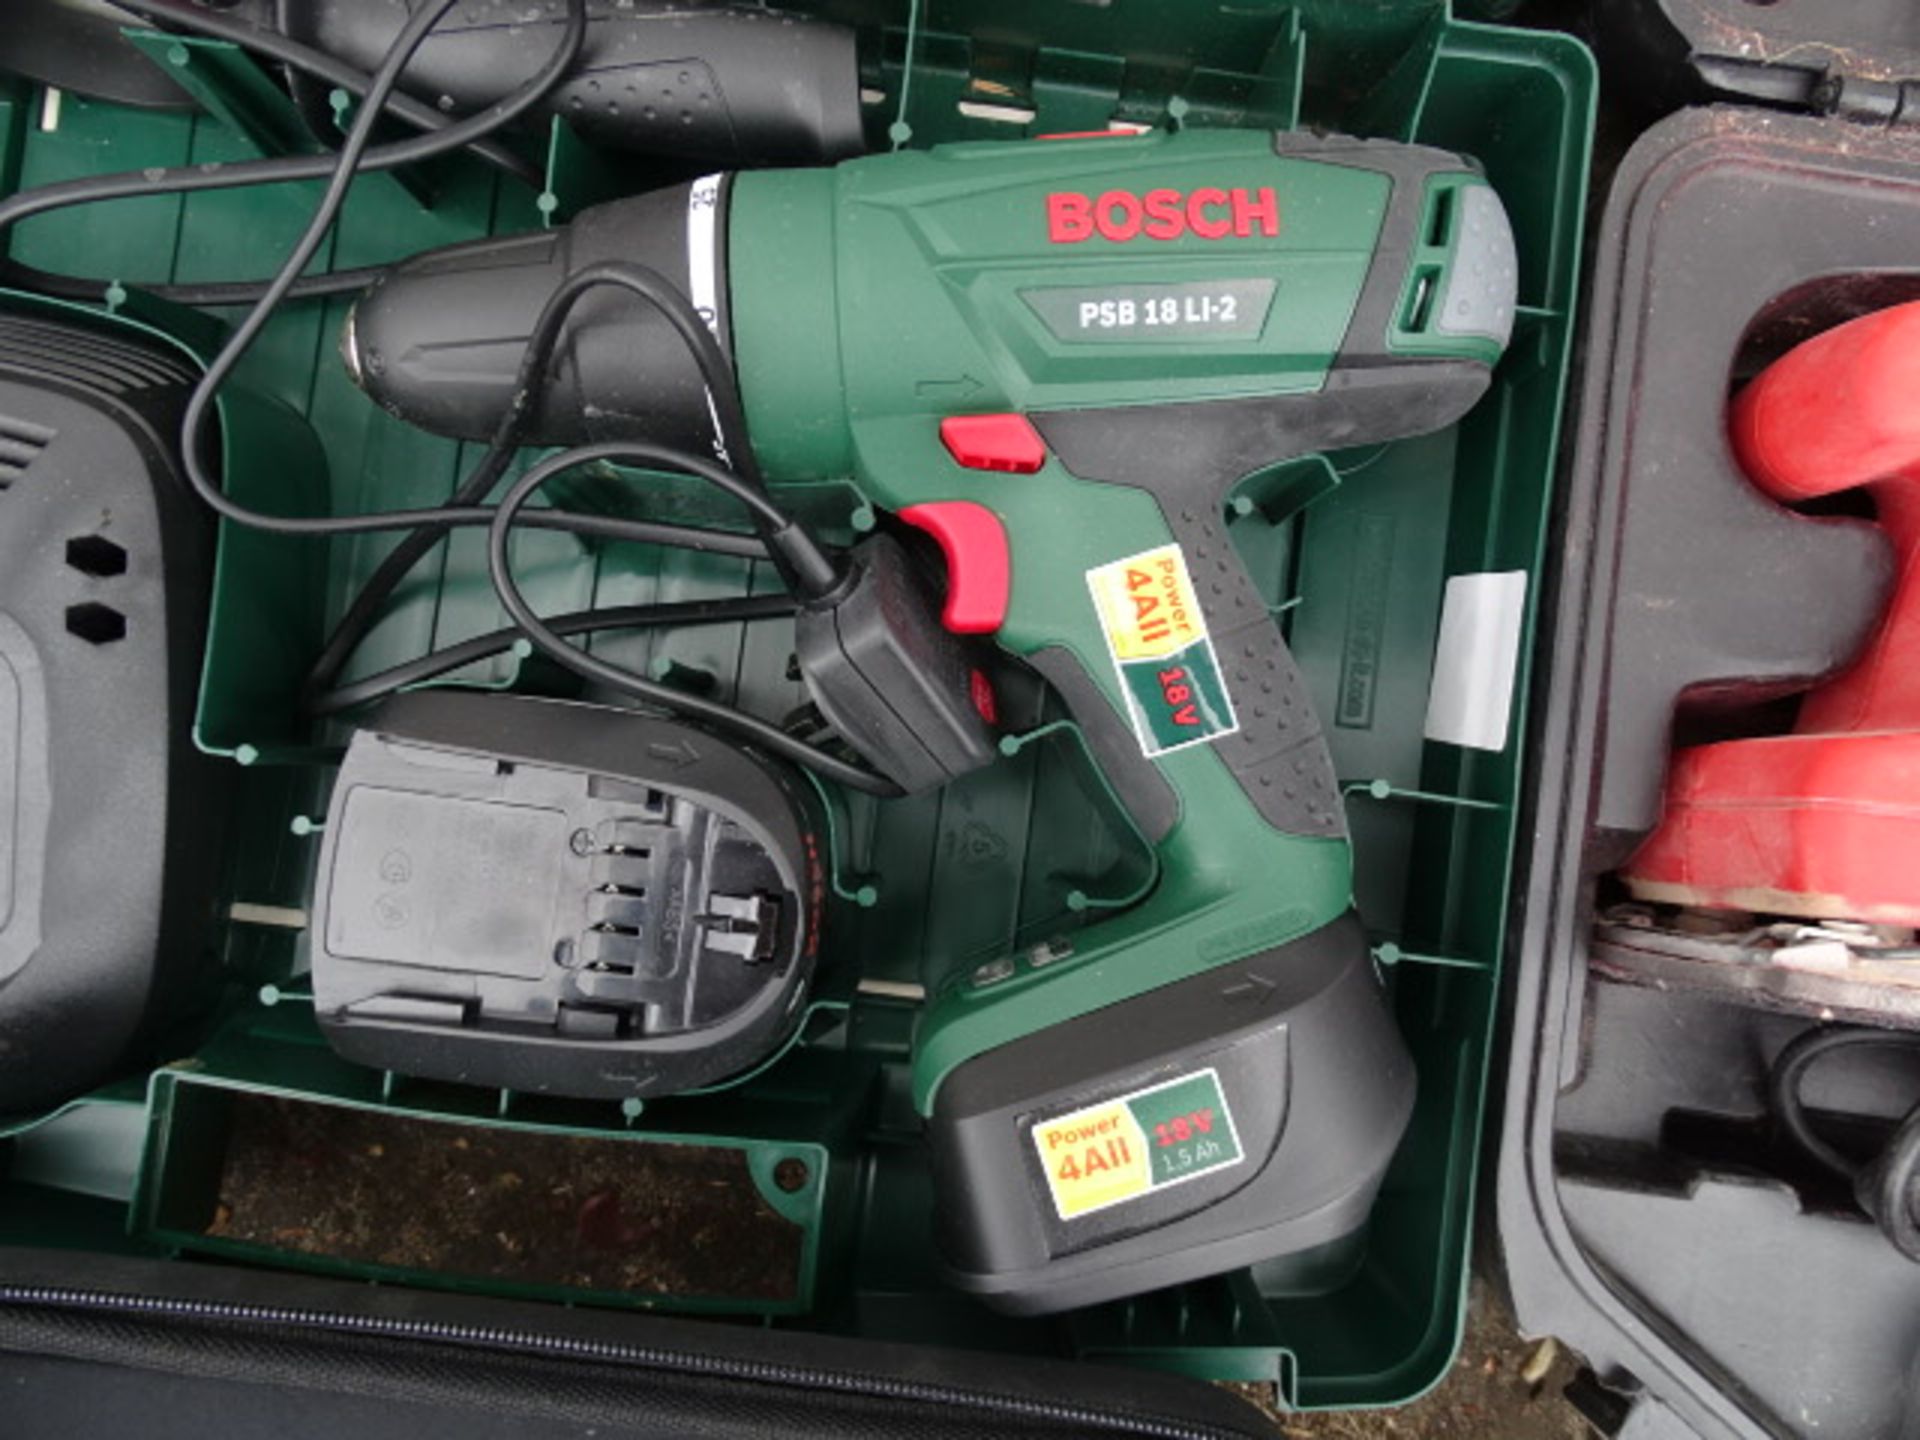 Bosch cordless lithium drill, garden trimmer and Black & Decker sander, all from a house clearance - Image 6 of 7